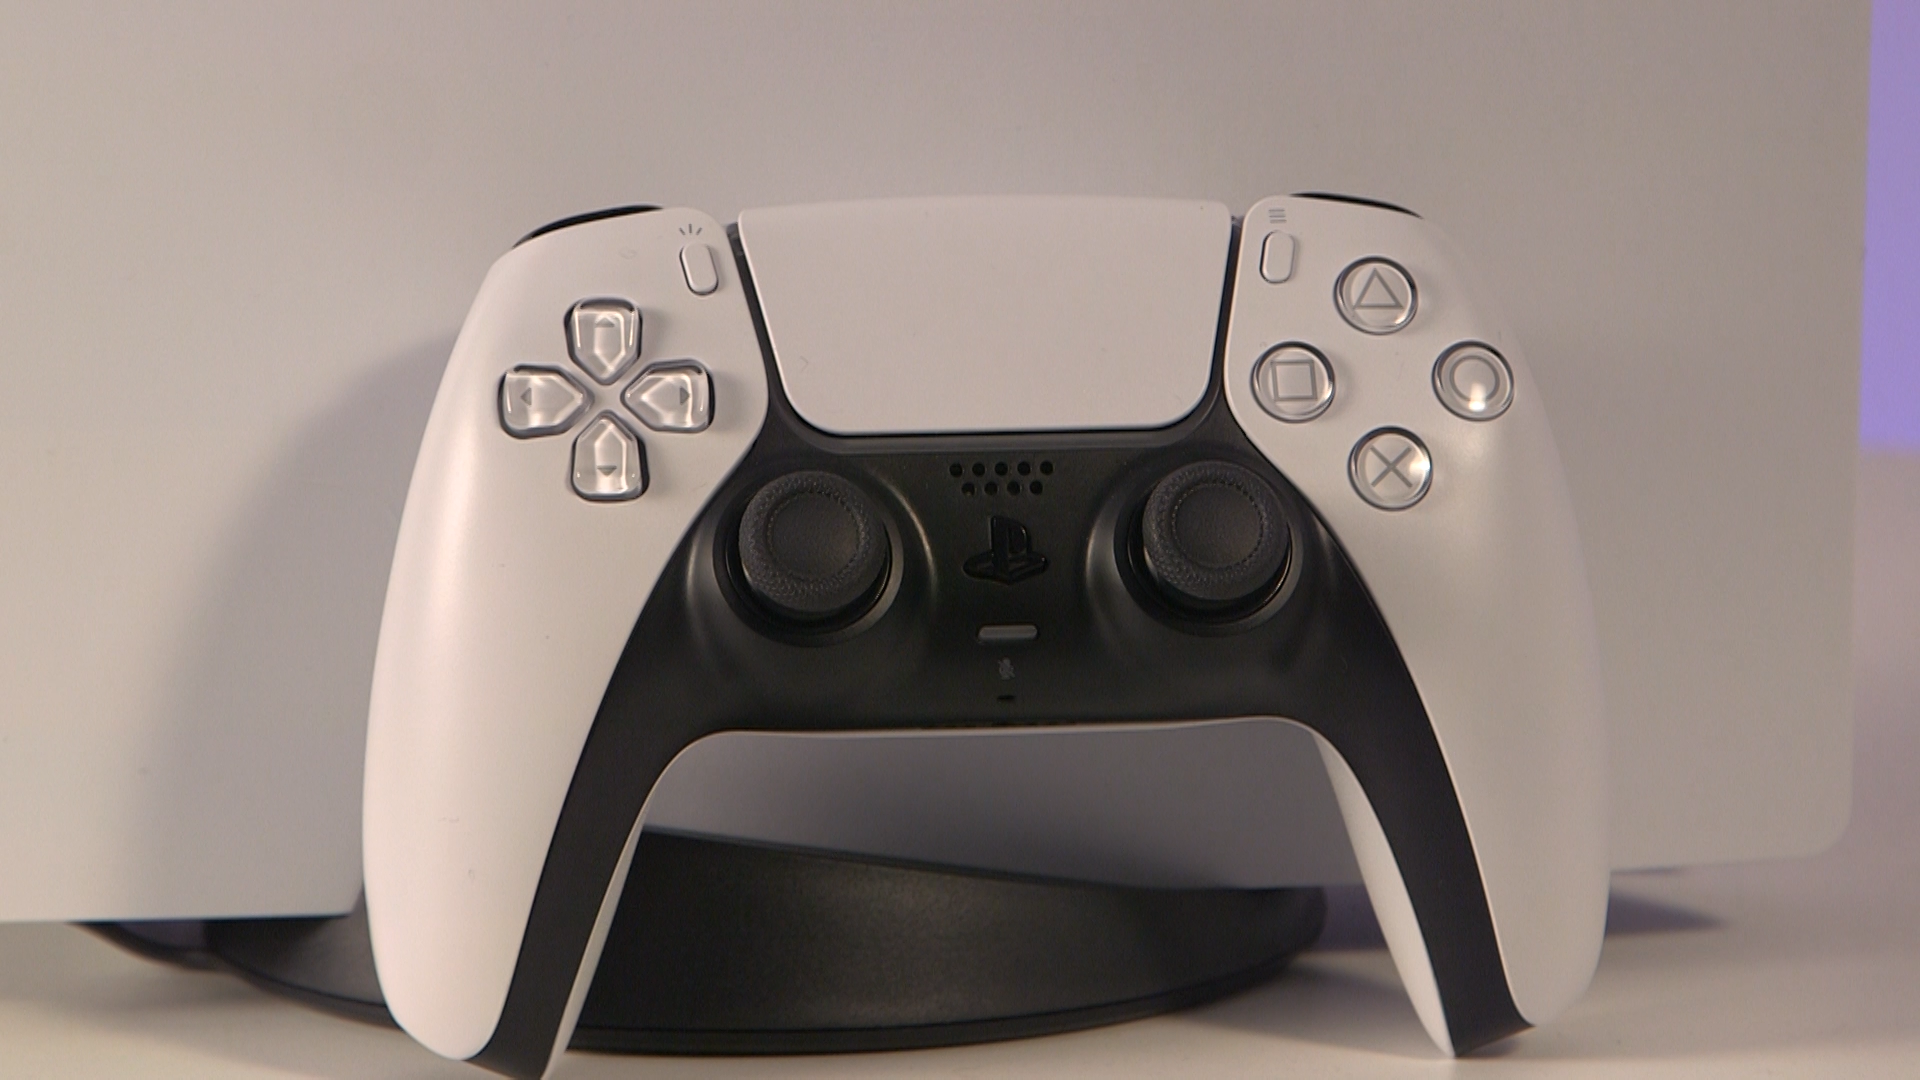 The PS5 DualSense controller leaning against a PS5